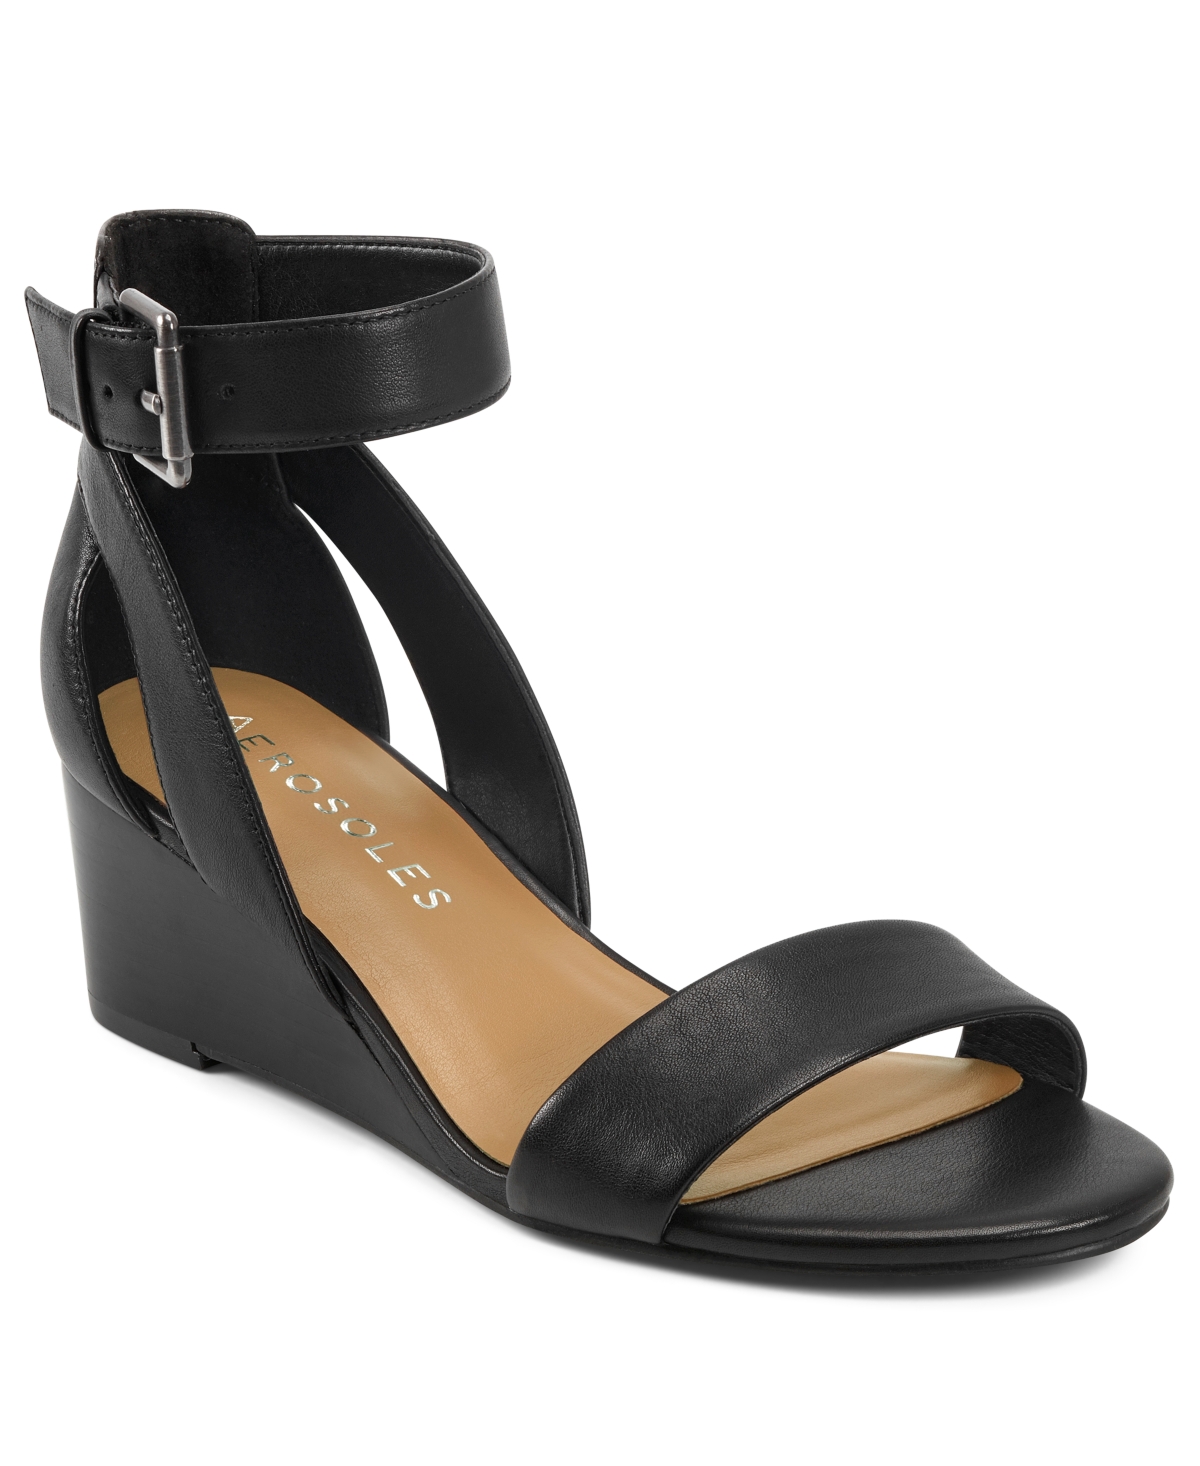 UPC 887039887464 product image for Aerosoles Willowbrook Wedge Sandals Women's Shoes | upcitemdb.com